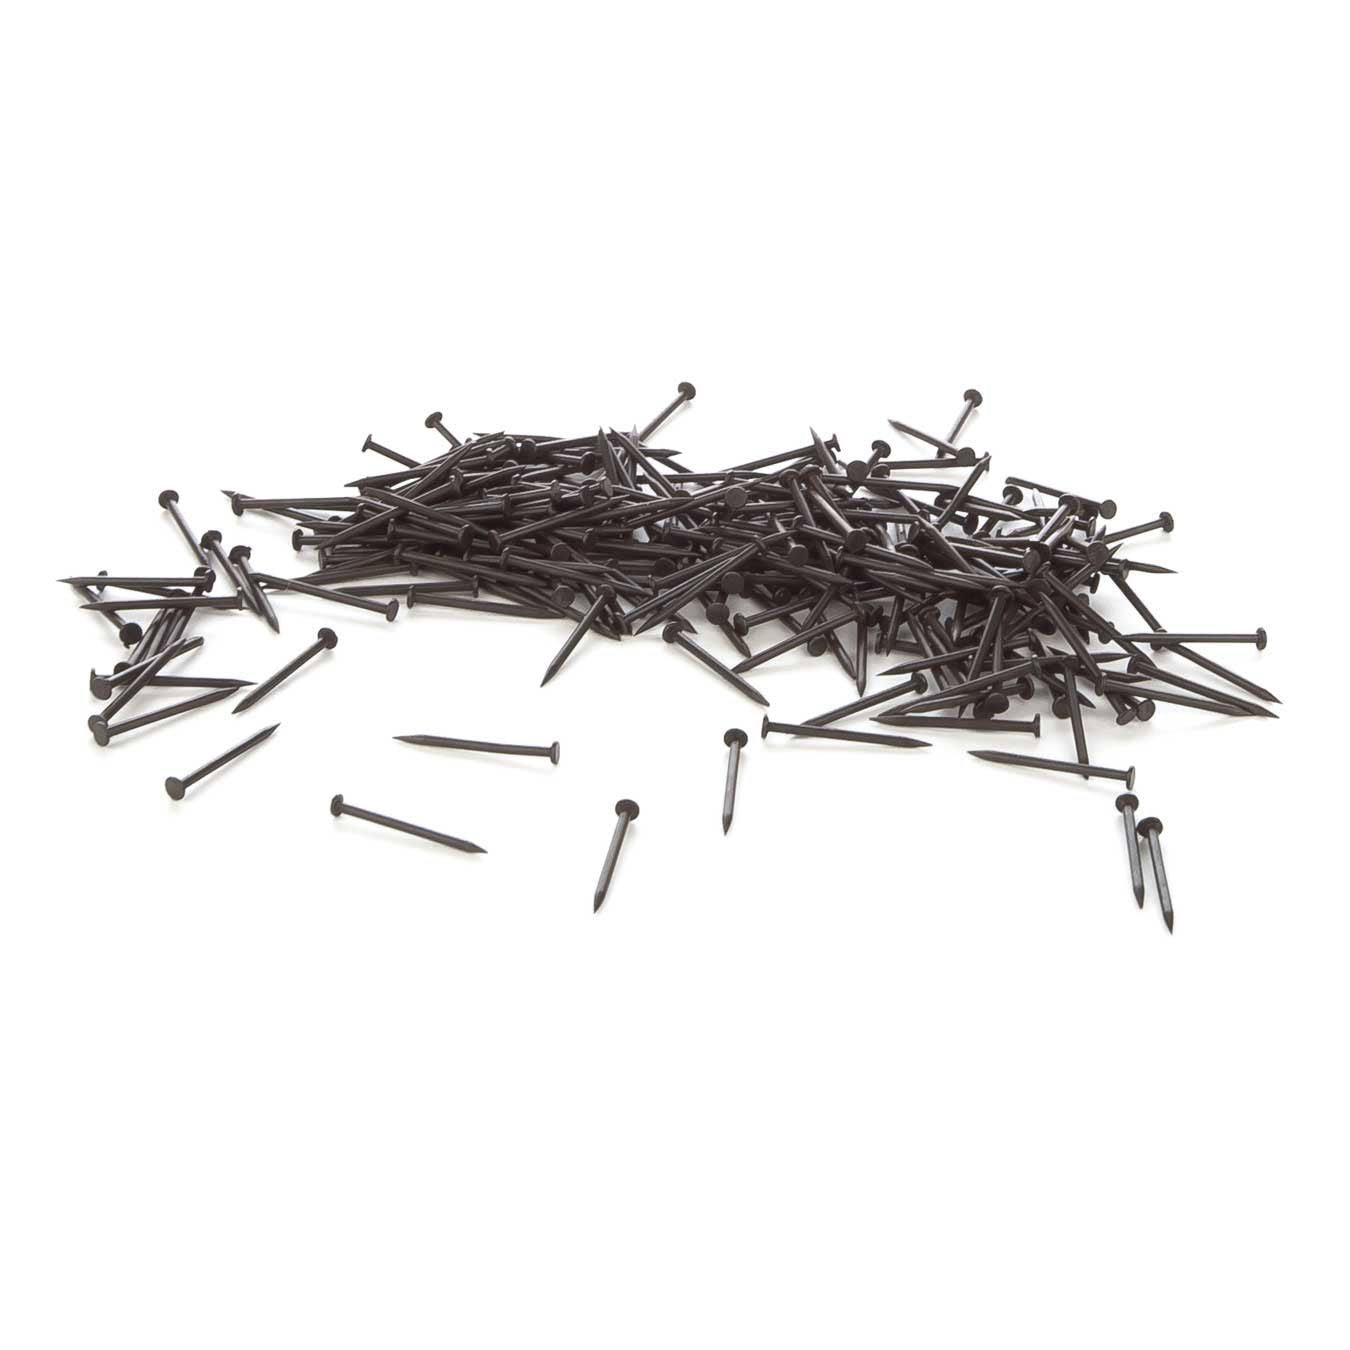 Walthers 948-83106 HO 0.7oz Blackened Track Nails (Pack of 300)